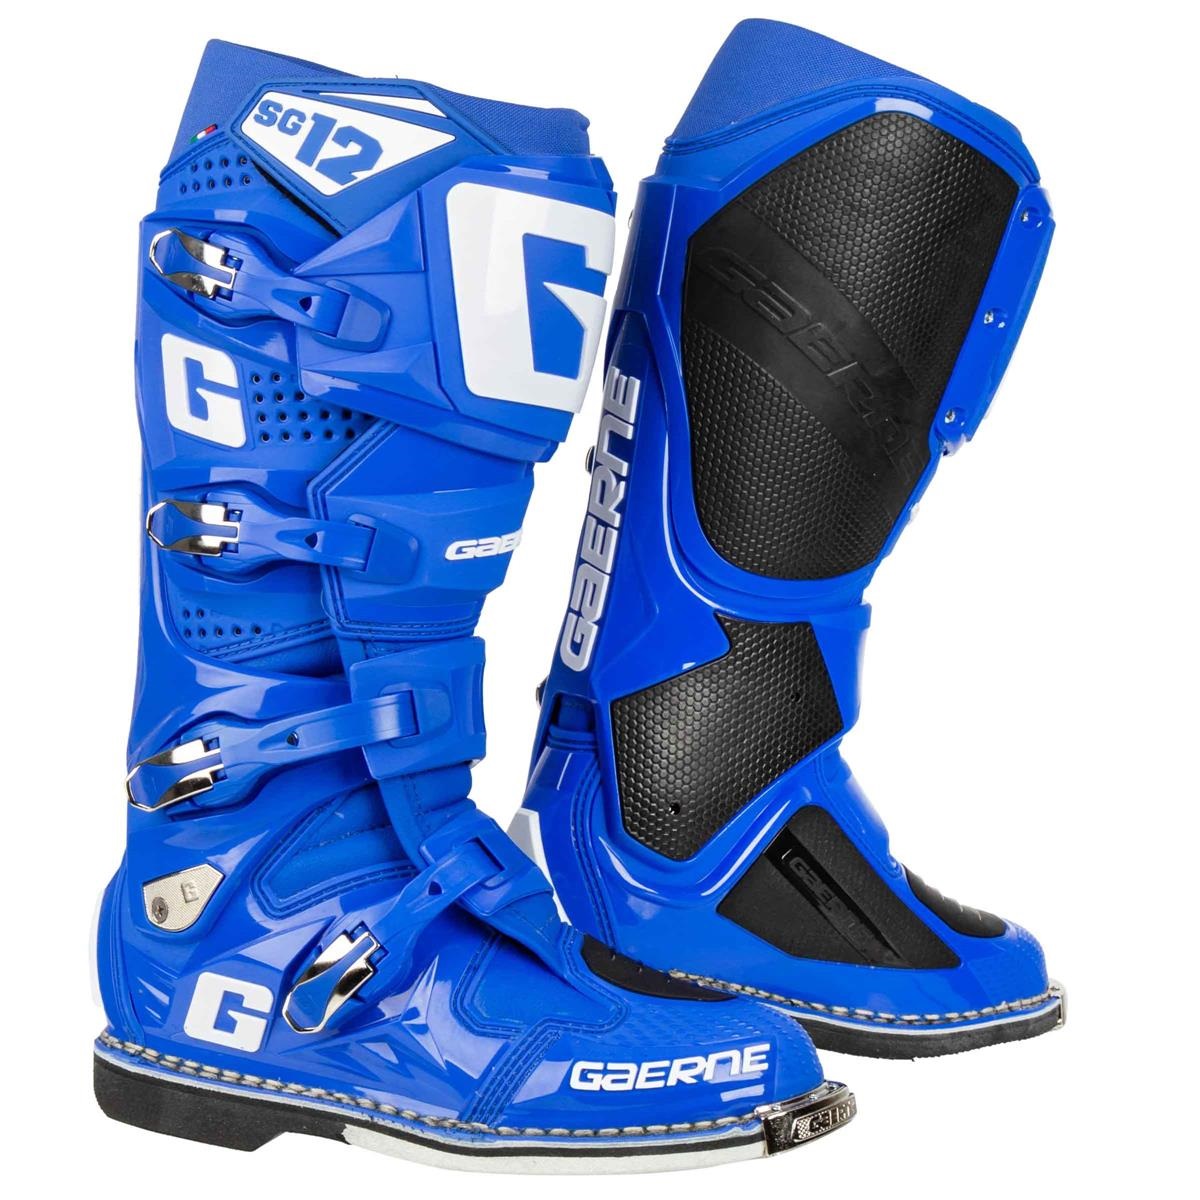 Gaerne SG 12 Boots Solid Blue - Sixstar Racing